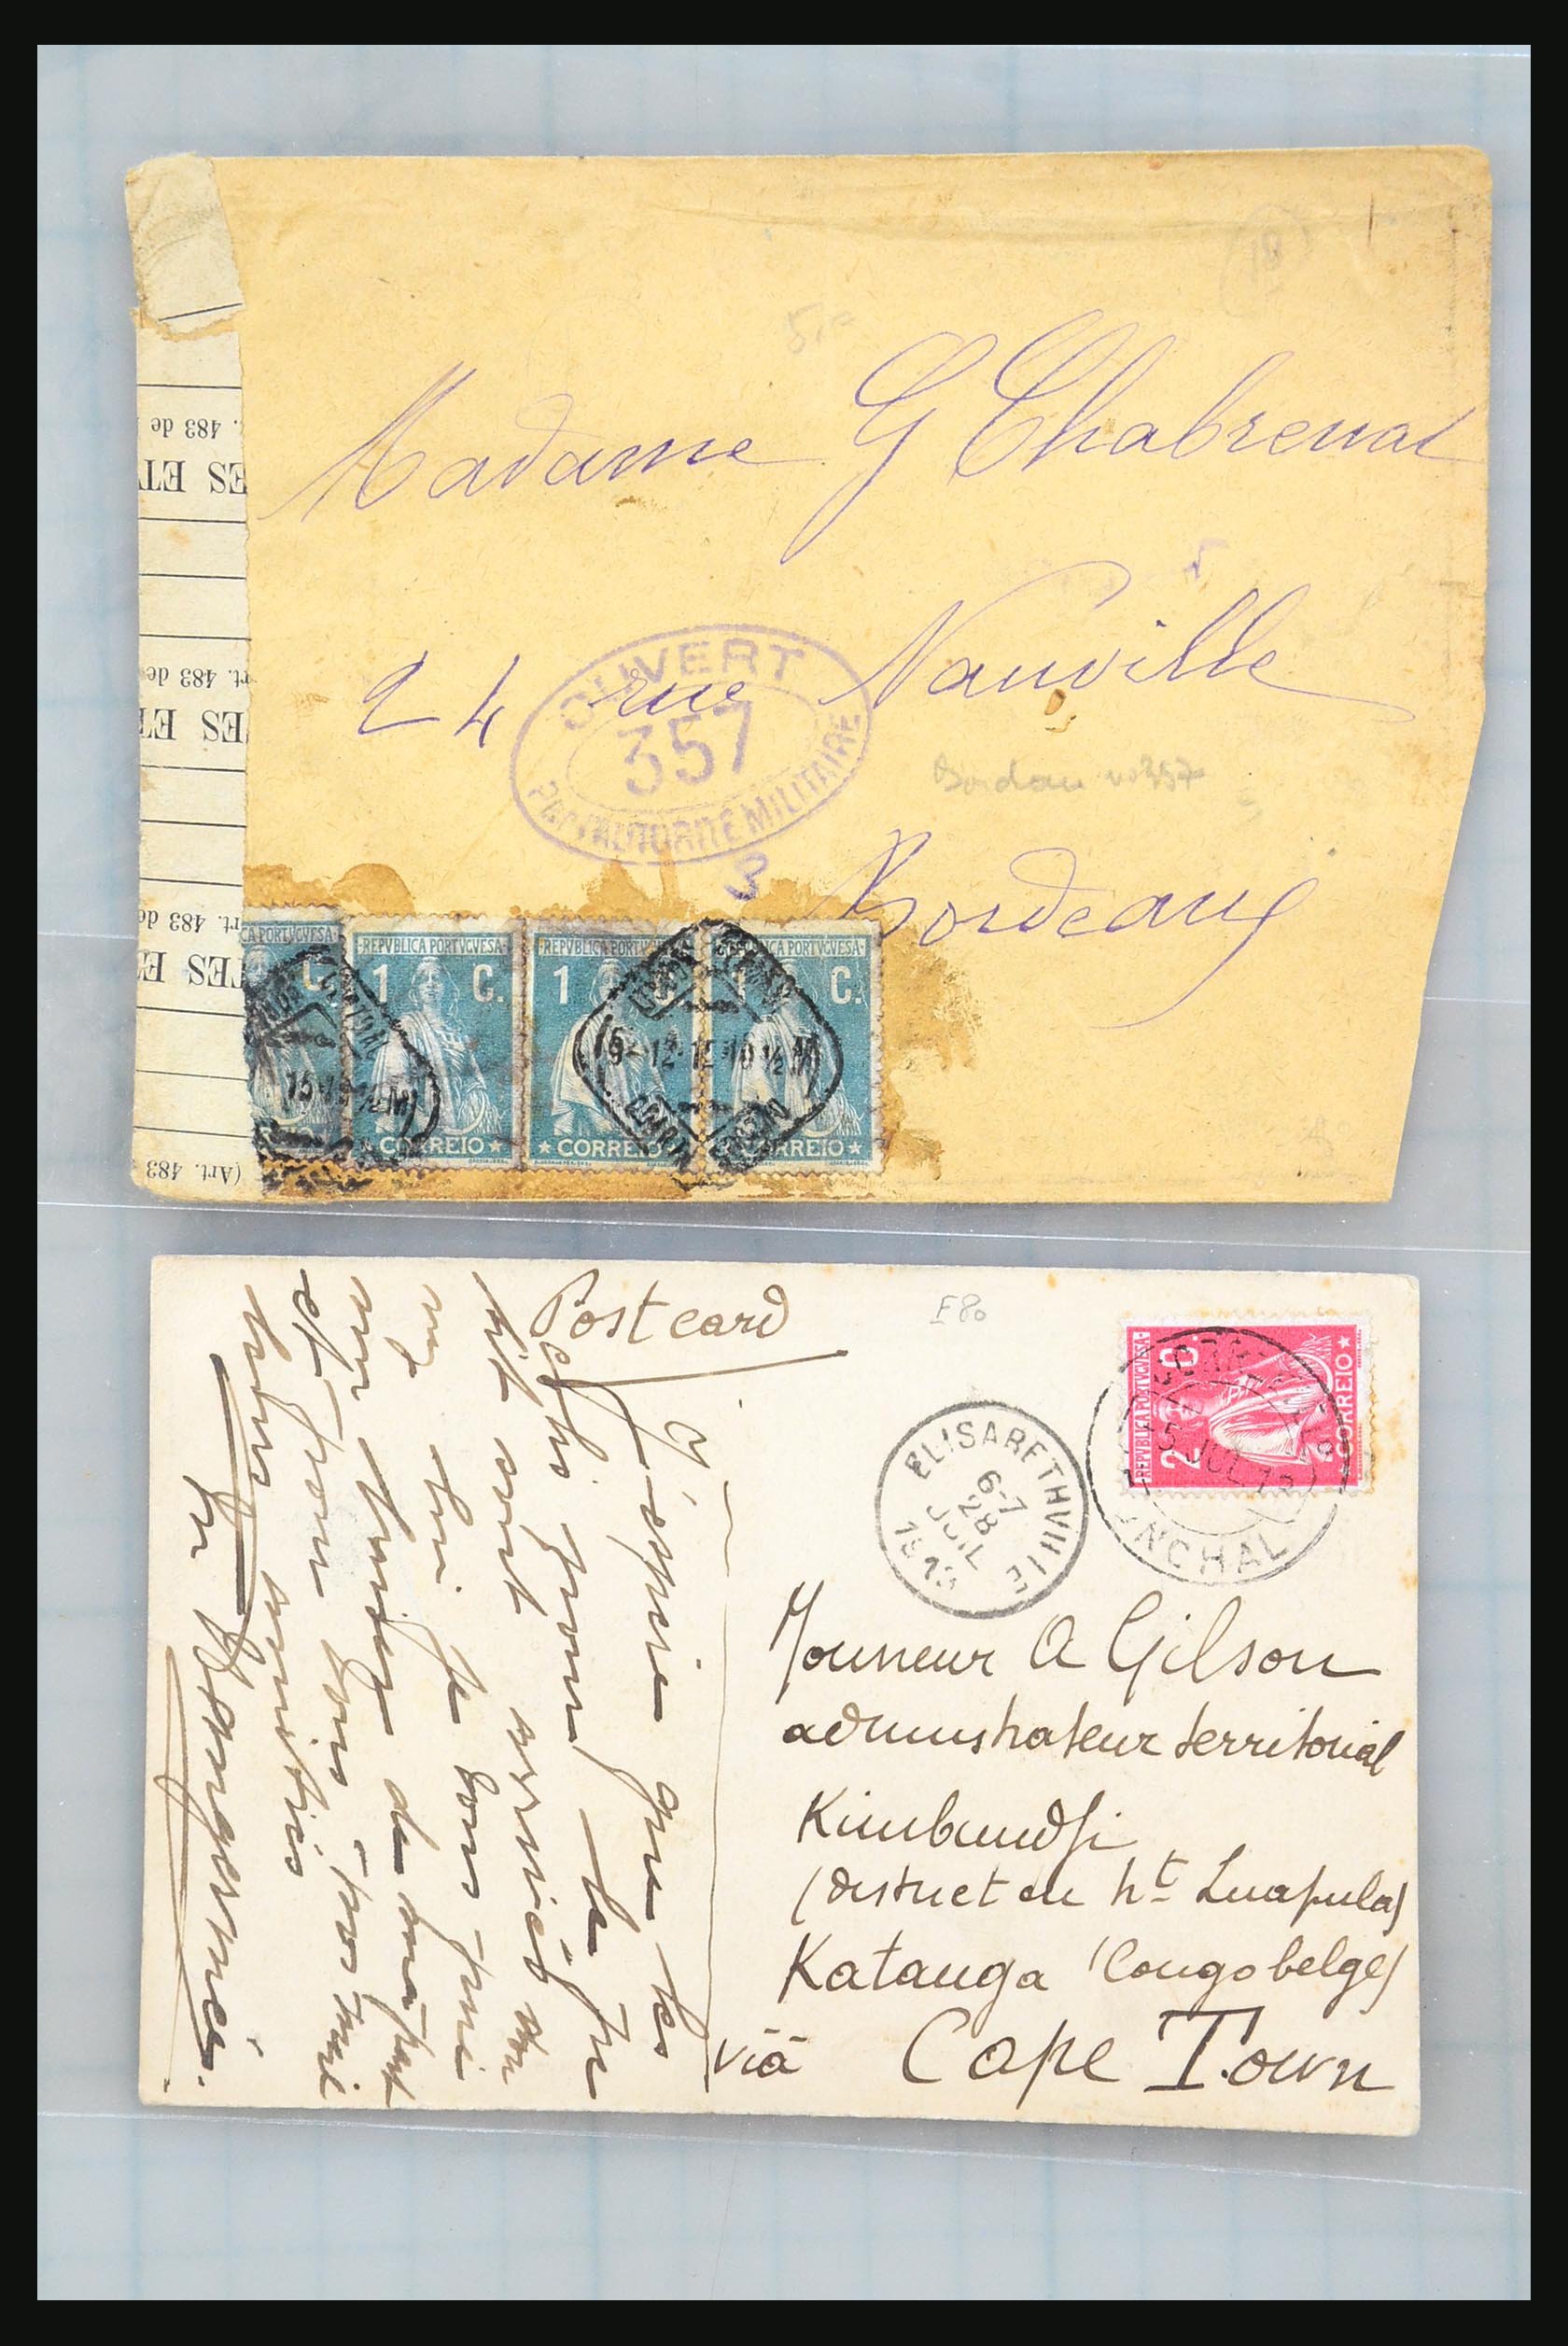 31358 252 - 31358 Portugal/Luxemburg/Greece covers 1880-1960.